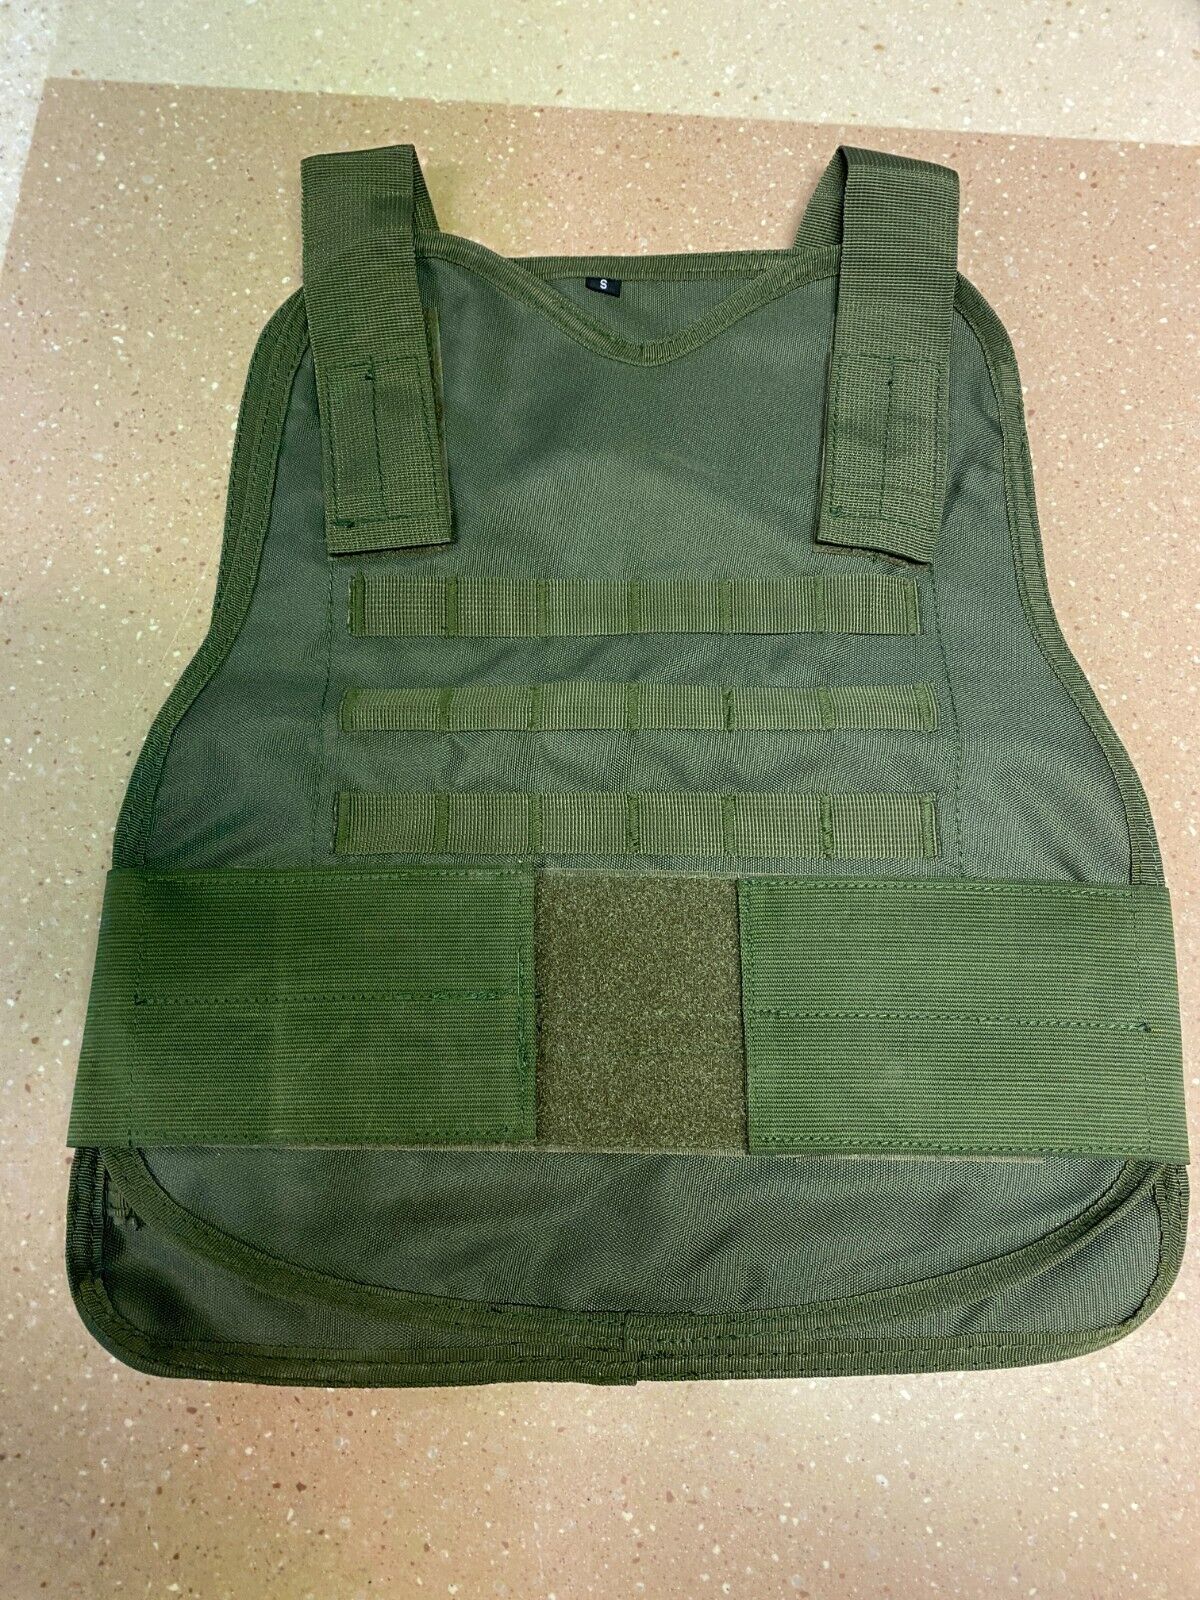 New OD Ballistic Carrier - size small